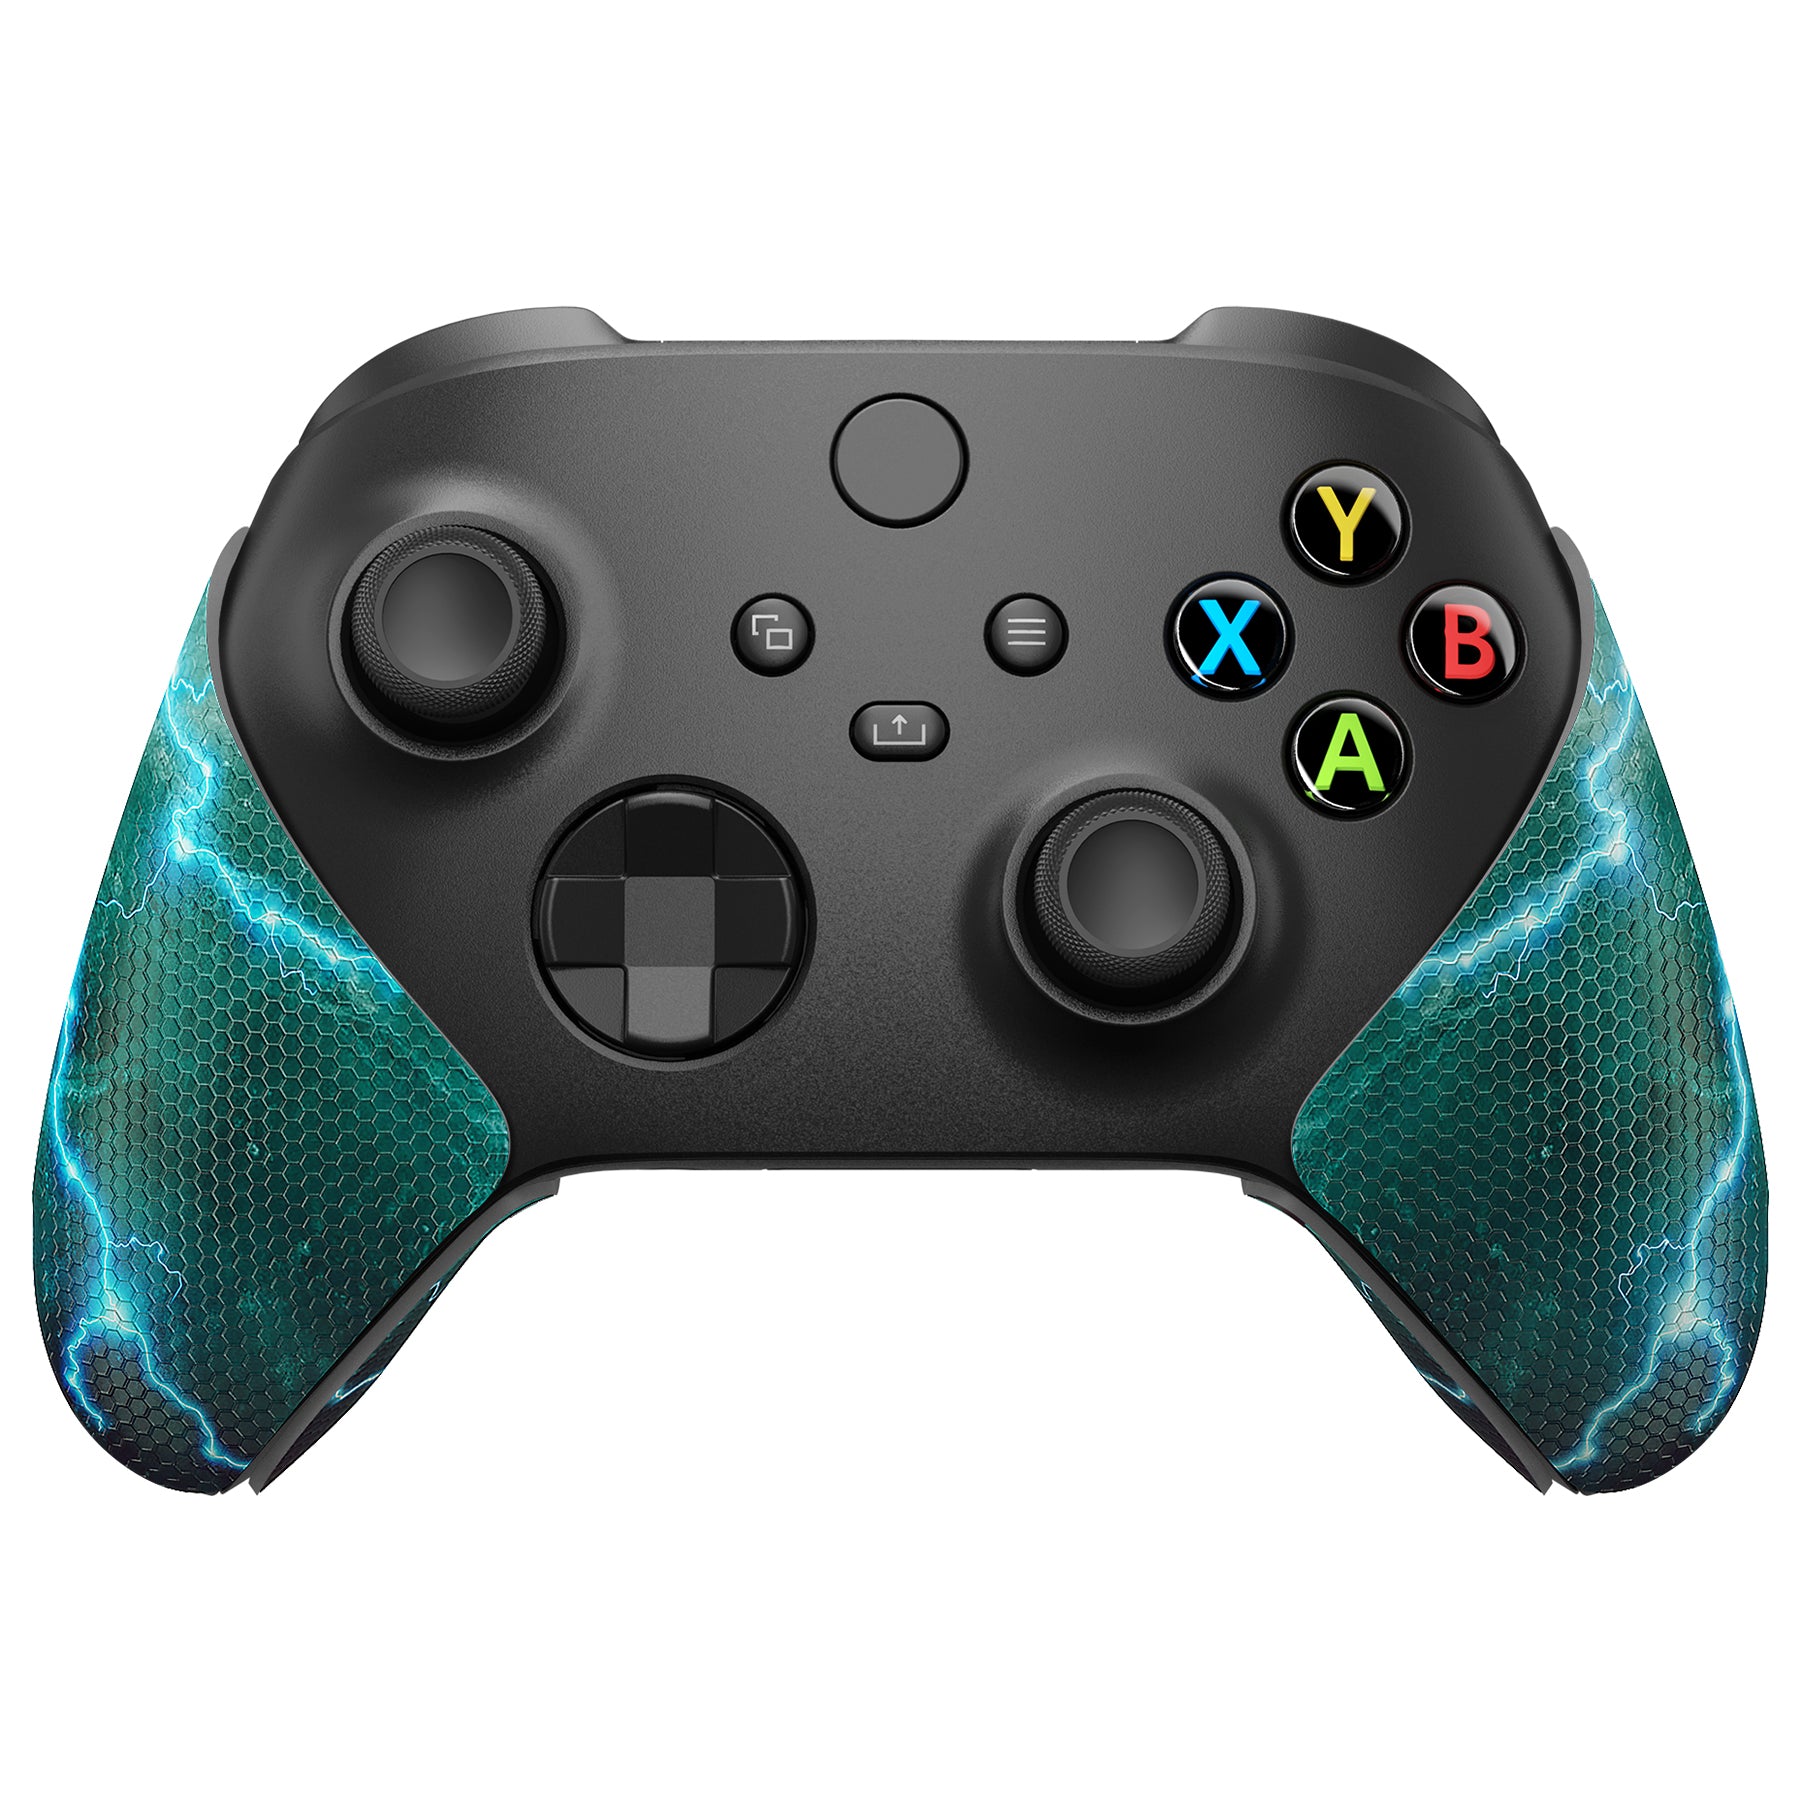 PlayVital Green Storm Thunder Anti-Skid Sweat-Absorbent Controller Grip for Xbox Series X/S Controller, Professional Textured Soft Rubber Pads Handle Grips for Xbox Series X/S Controller - X3PJ047 PlayVital